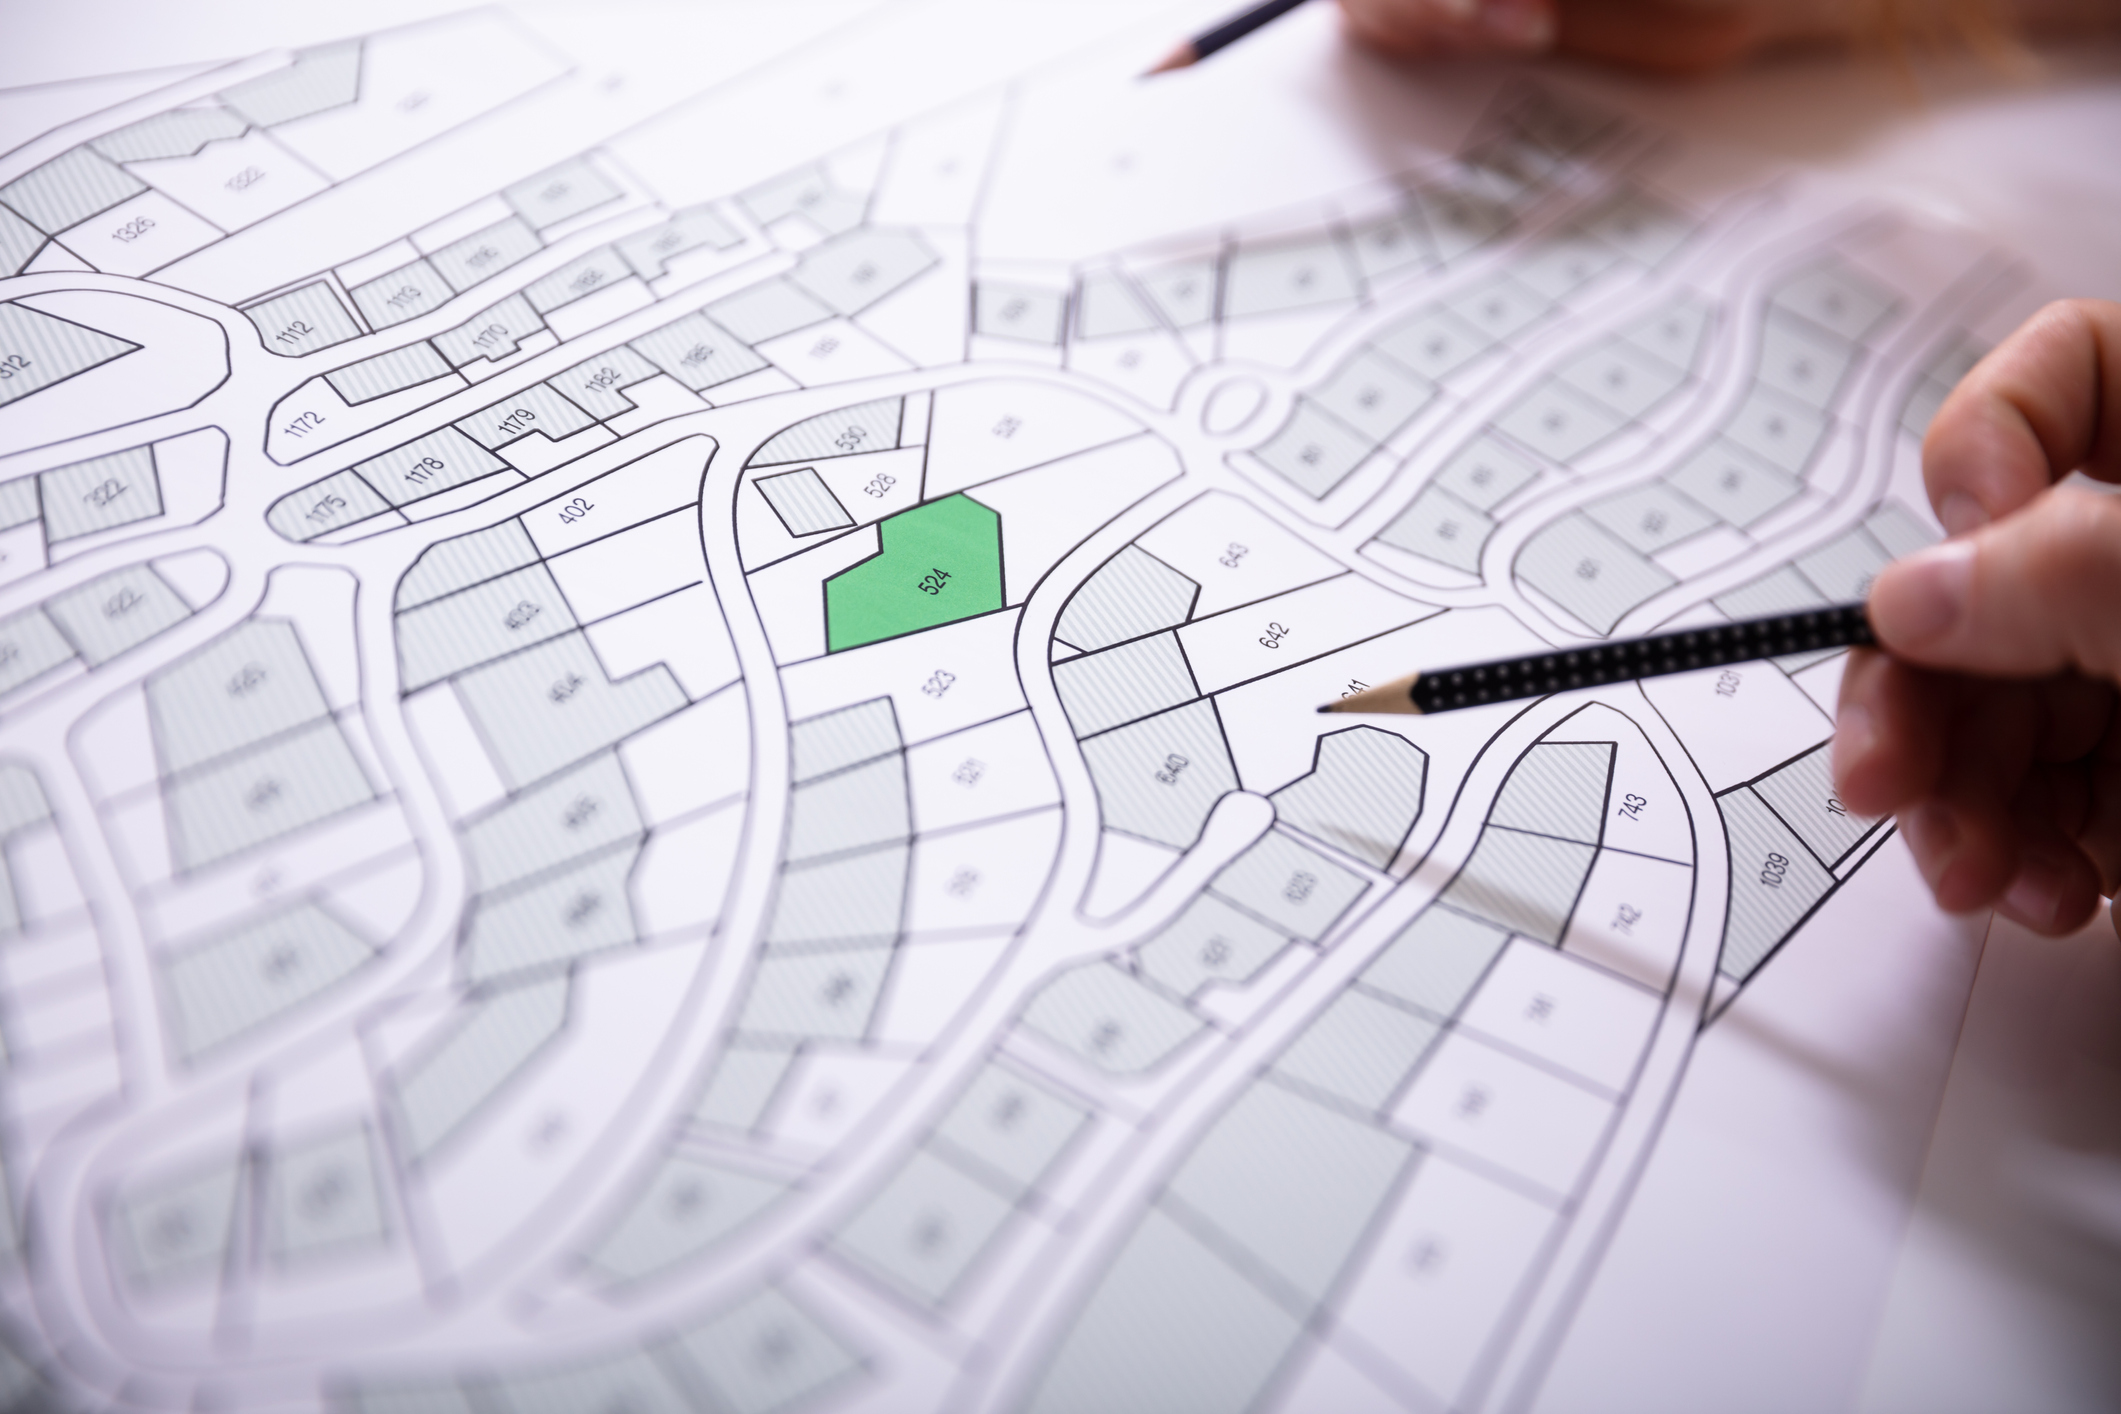 How to Find Out Which Planning Rules Apply to Your Project